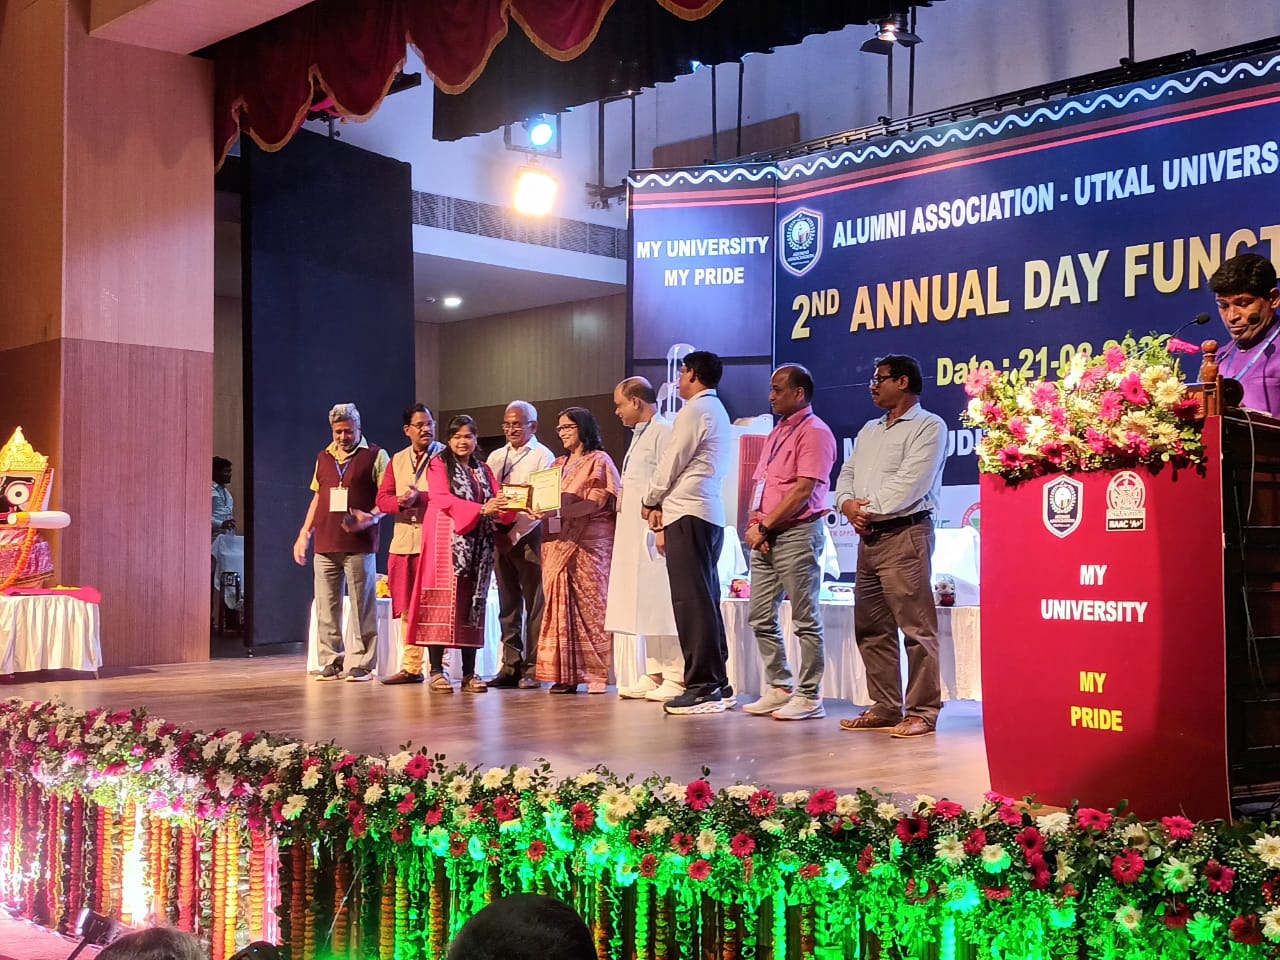 Chinmayee Mishra Awarded Second Prize in the Song Competition conducted by Alumni Association of Utkal University on the occasion of 2nd Annual Day celebration on 21st August 2022.